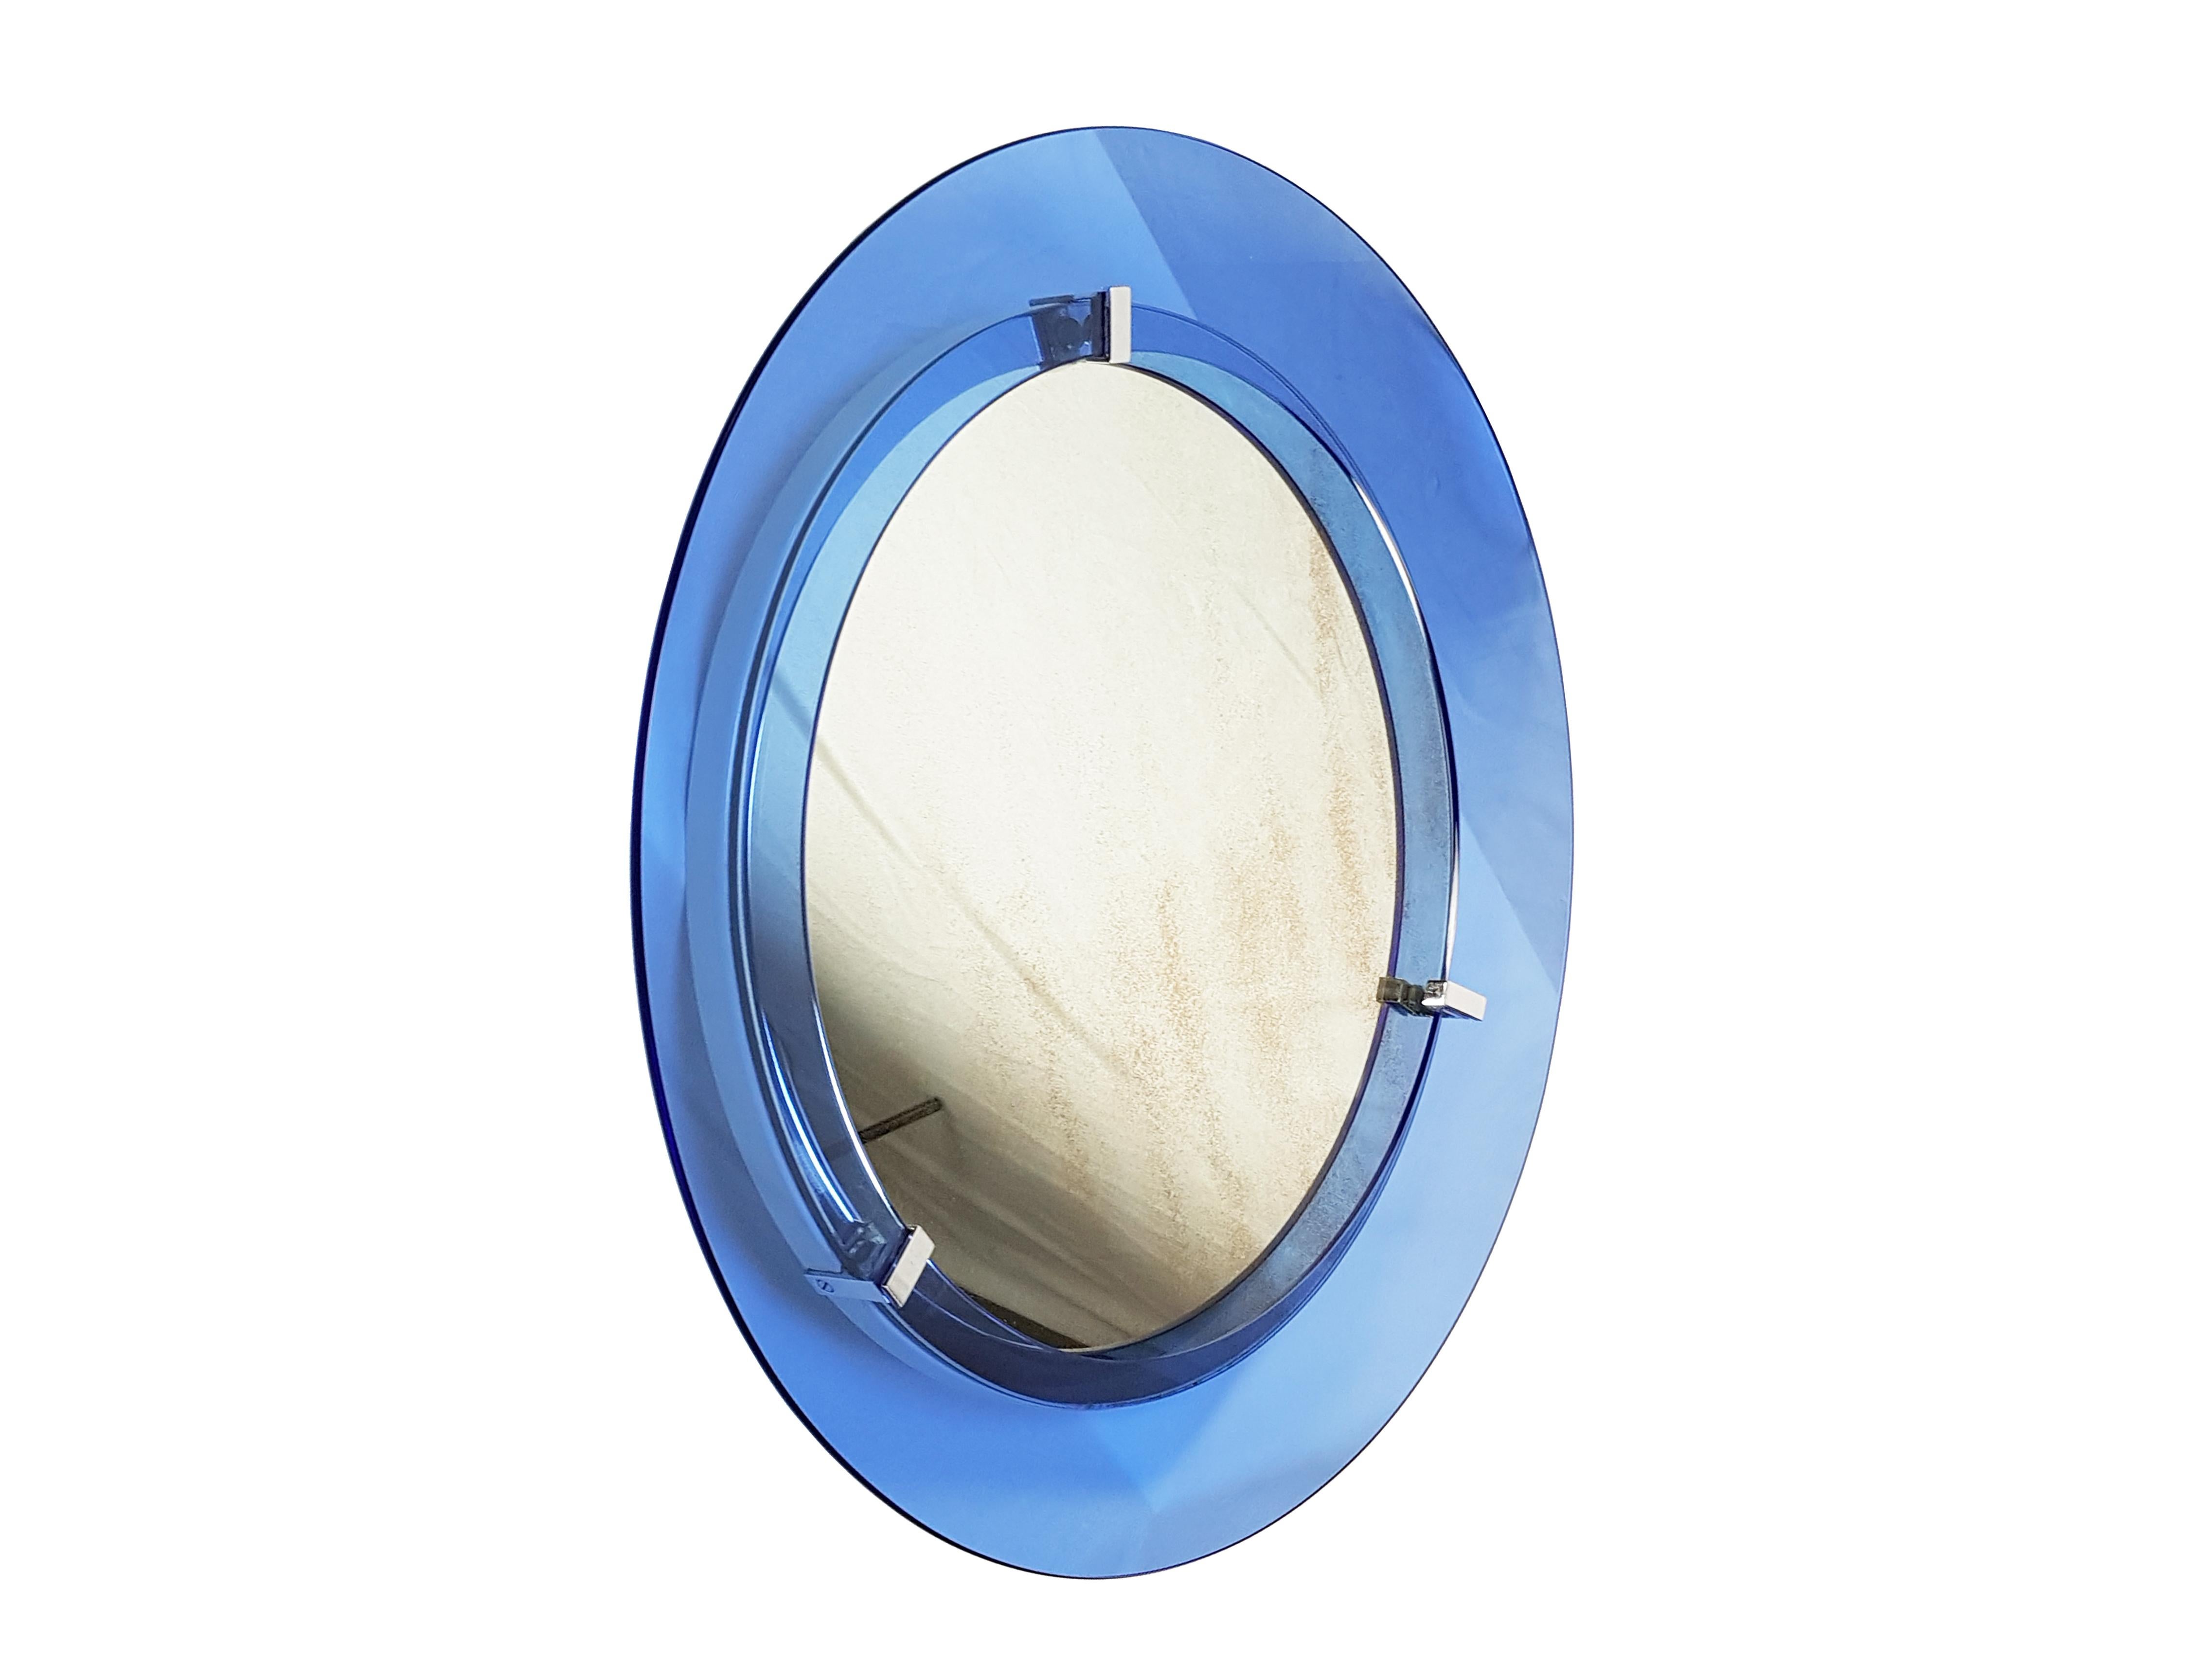 This beautiful and fine wall mirror is made from a convex blue glass frame connected to the main body through 4 chrome-plated metal supports. The frame and the white metal body remain in very good condition, the mirror shows visible signs of